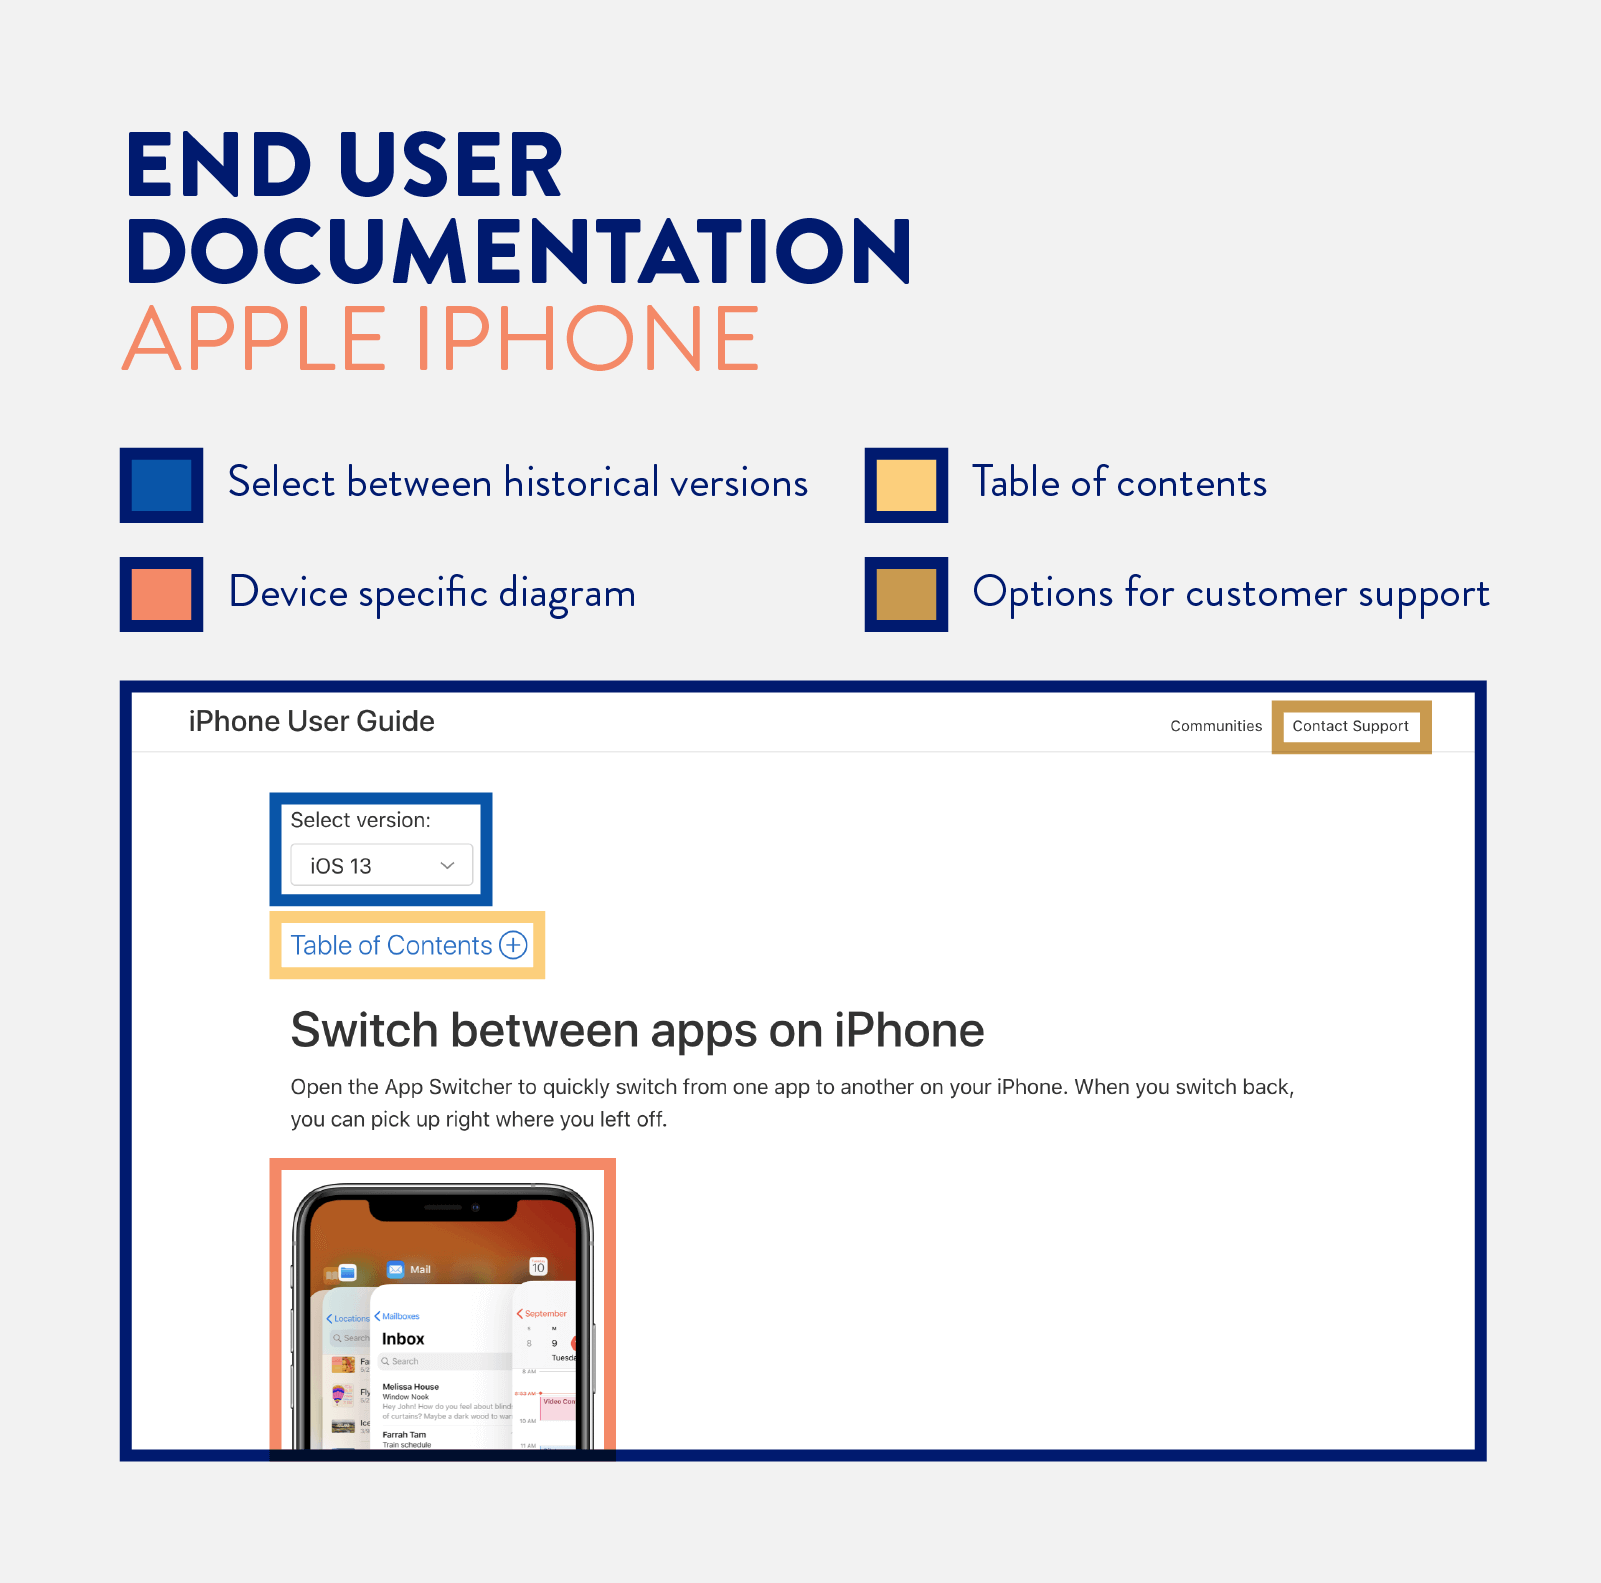 end user documentation example from the Apple iPhone